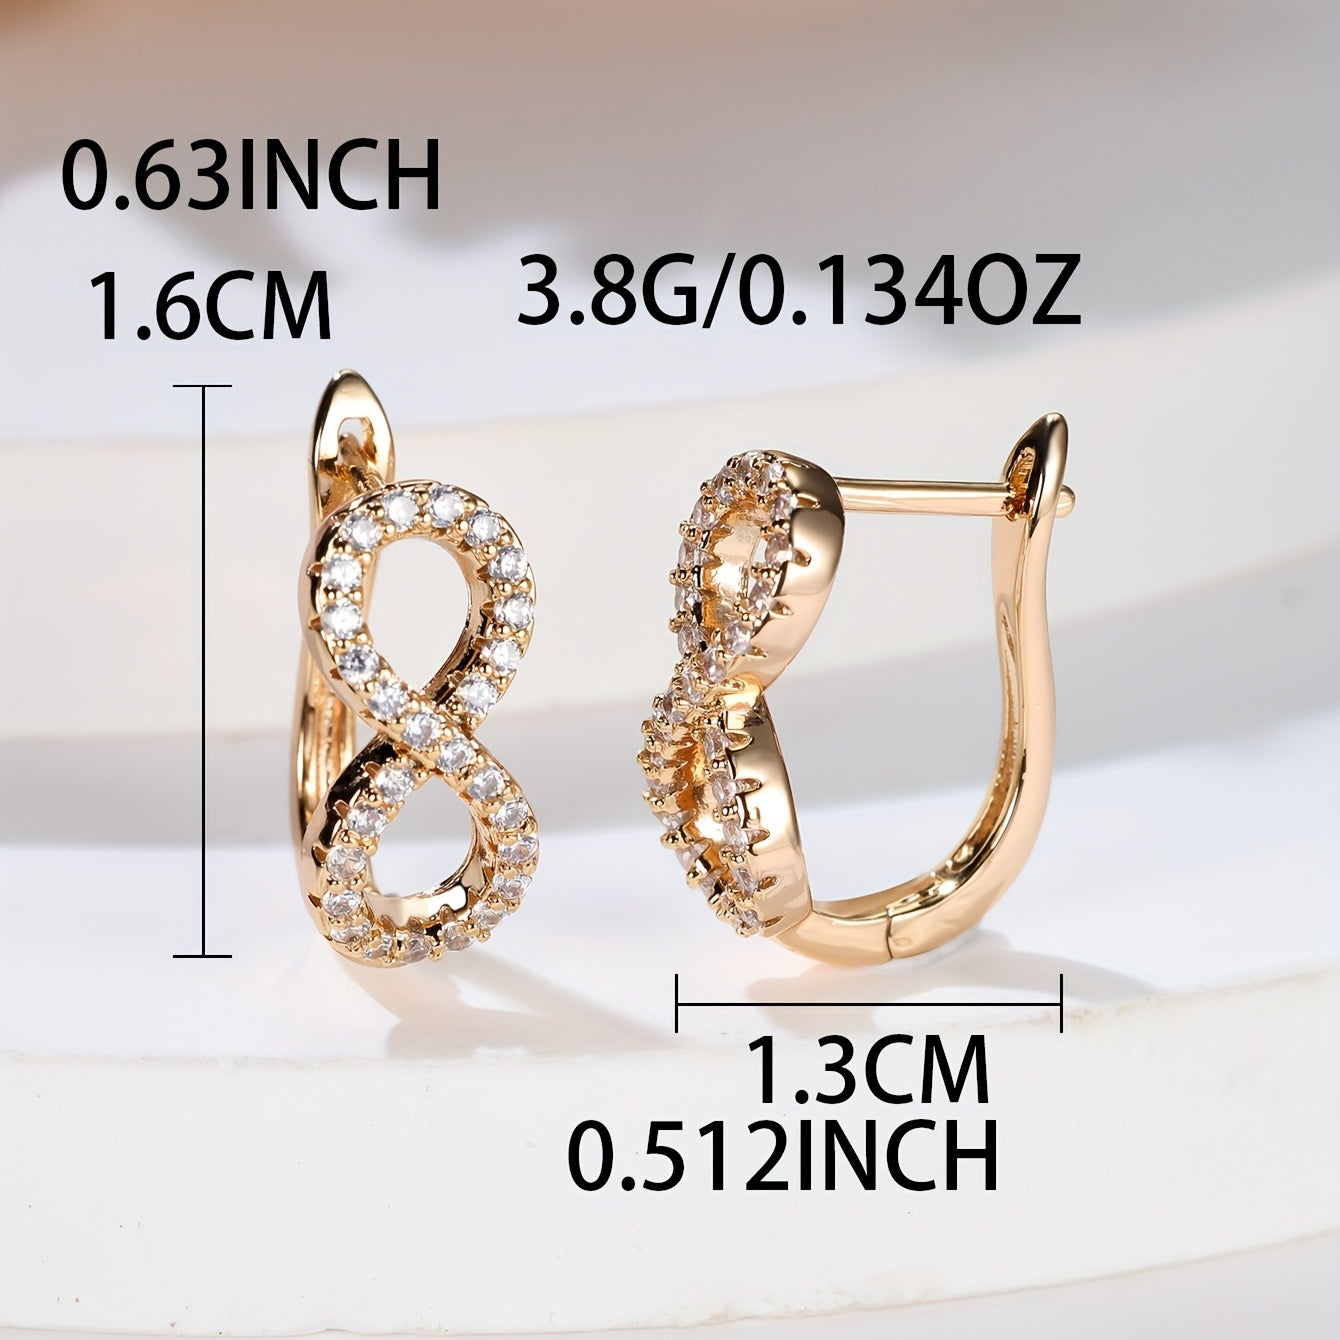 Gorgeous 18K Gold Plated Bohemian Hoop Earrings with Shiny Zircon Decor - Perfect for Everyday Wear!